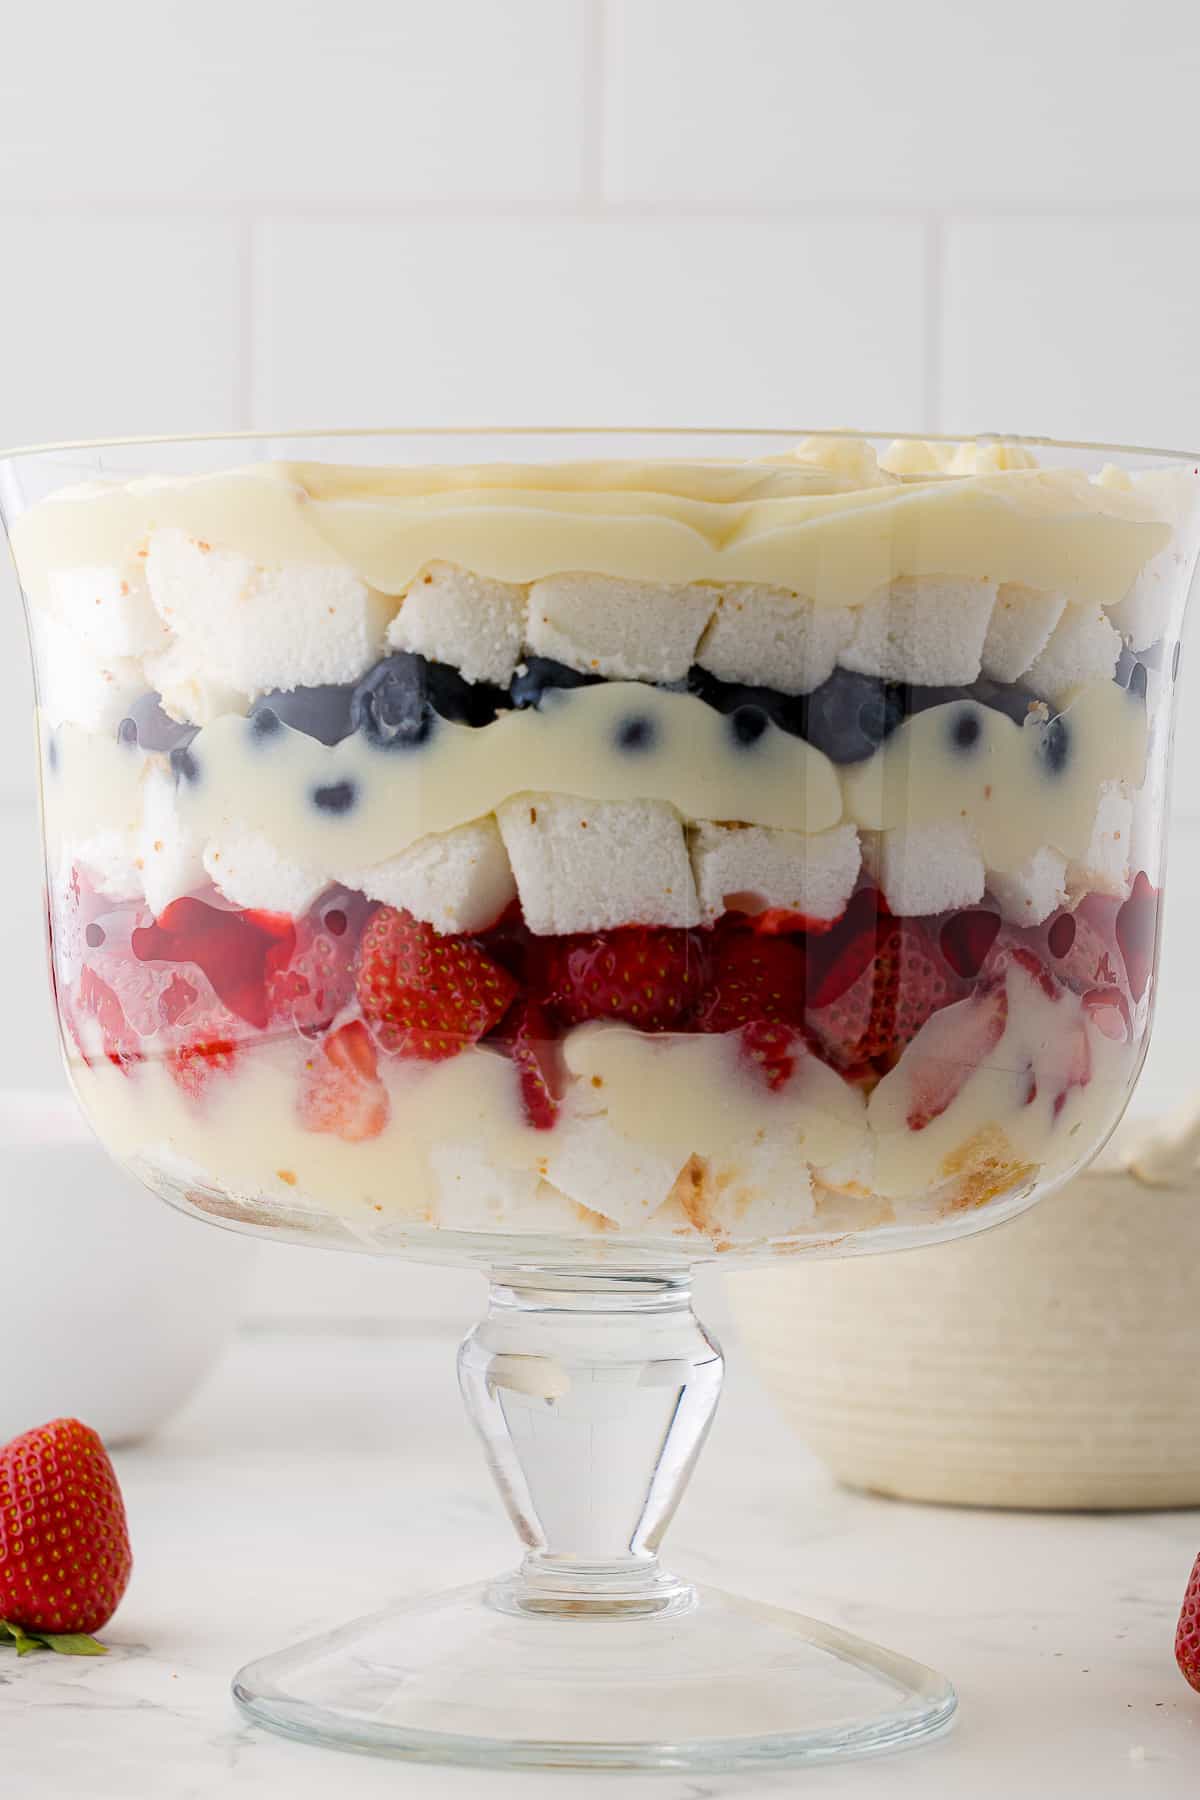 Side view of layered trifle in a glass bowl with layers of strawberries, blueberries, Cool Whip, and bite sized angel food cake pieces